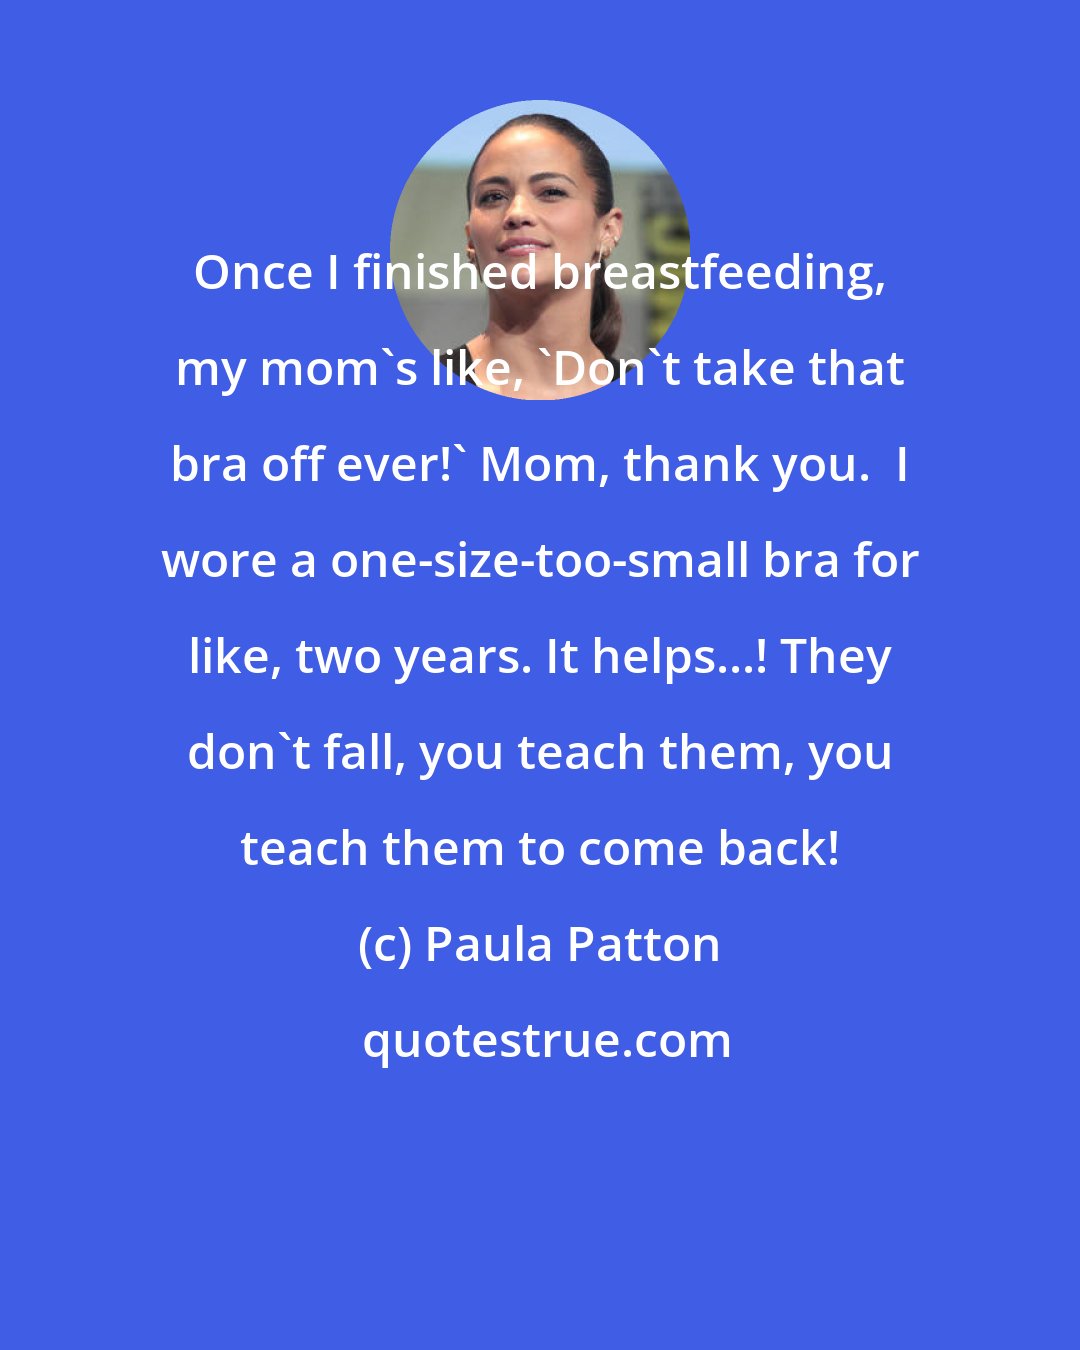 Paula Patton: Once I finished breastfeeding, my mom's like, 'Don't take that bra off ever!' Mom, thank you.  I wore a one-size-too-small bra for like, two years. It helps...! They don't fall, you teach them, you teach them to come back!